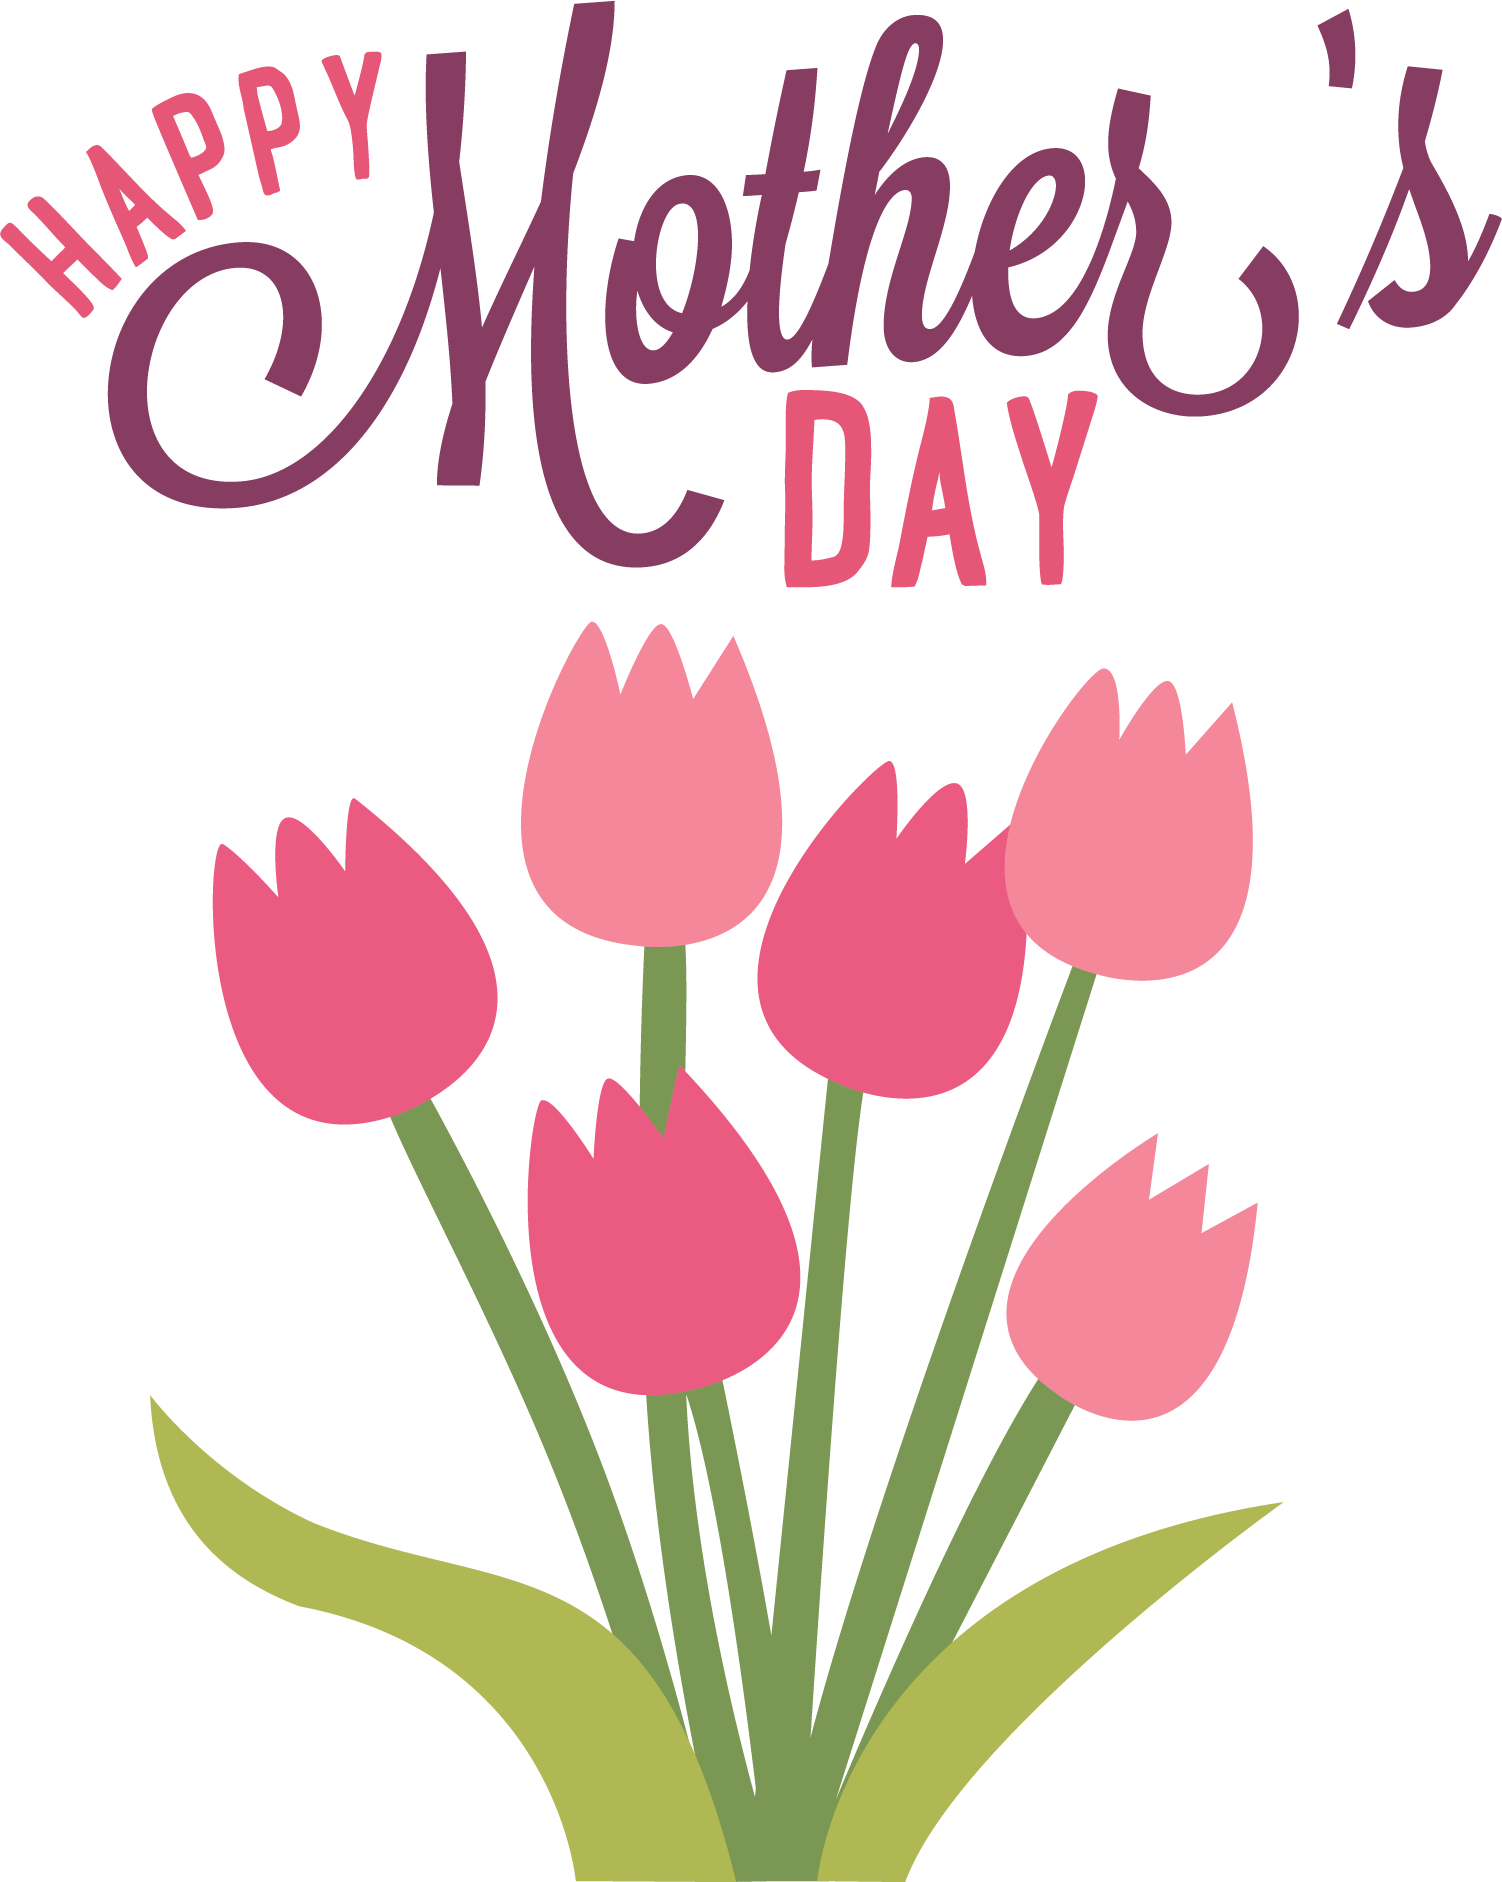 free clipart images mothers day - photo #10